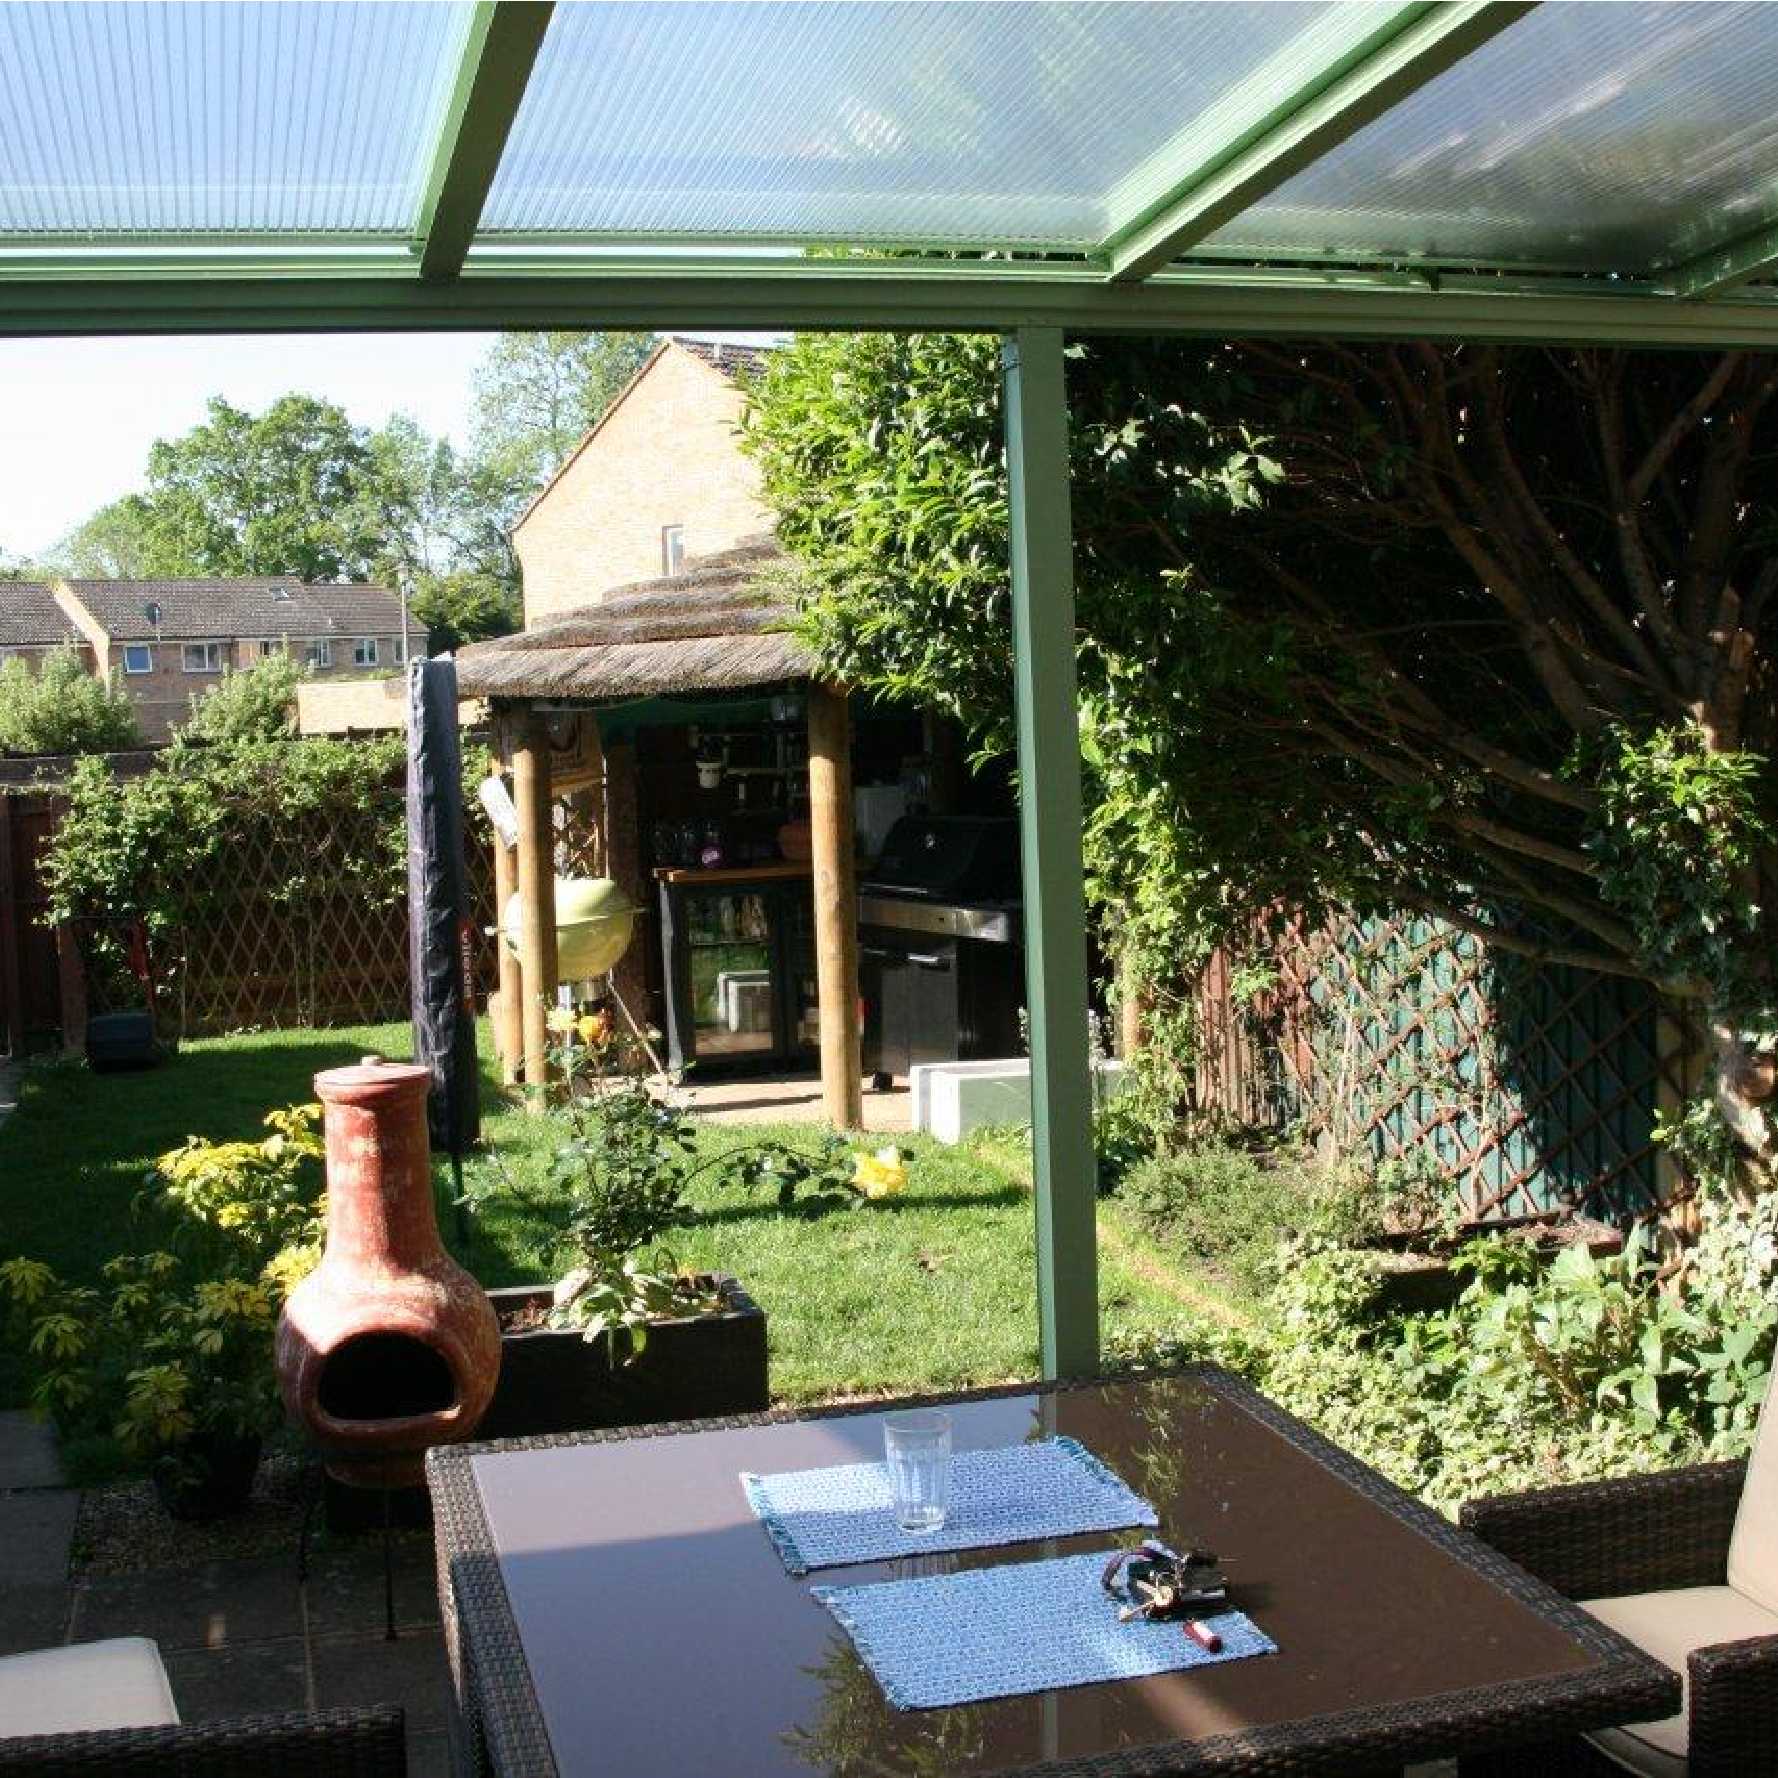 Affordable Omega Smart Lean-To Canopy, White with 16mm Polycarbonate Glazing - 6.3m (W) x 2.5m (P), (4) Supporting Posts